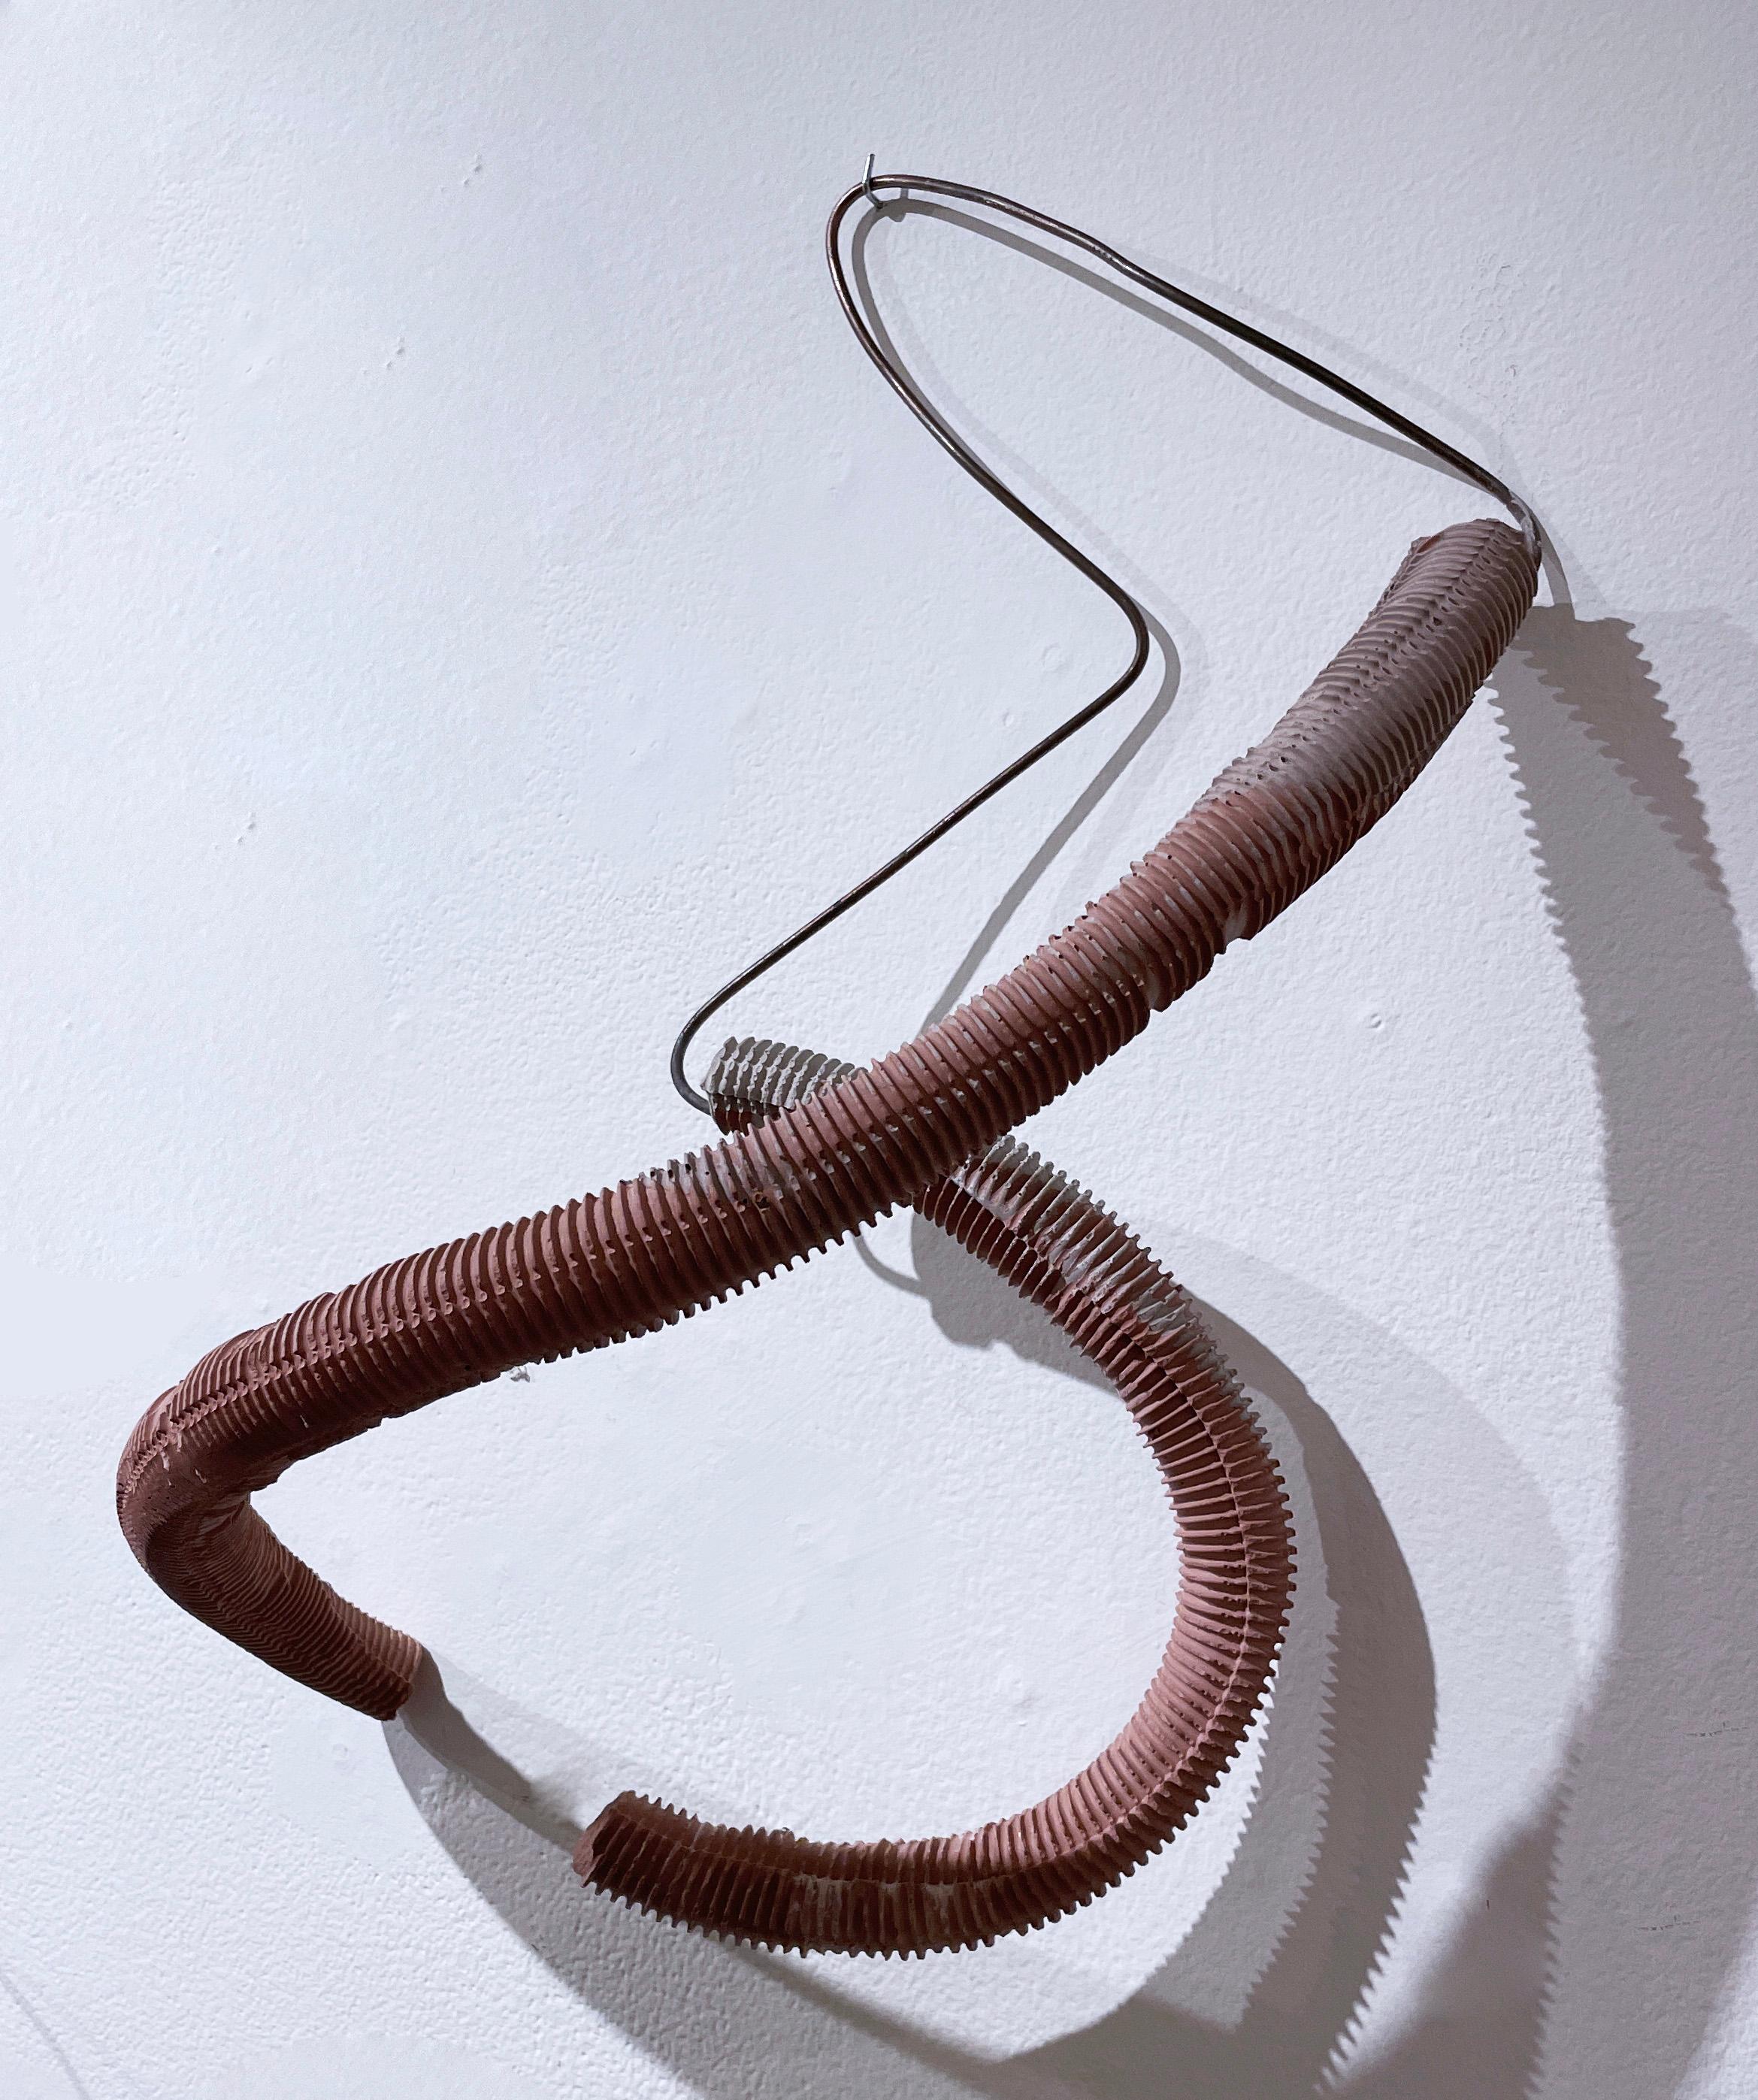 Dancing Wire Form (2022), terracotta concrete abstract sculpture, metal wire - Abstract Sculpture by Dena Paige Fischer